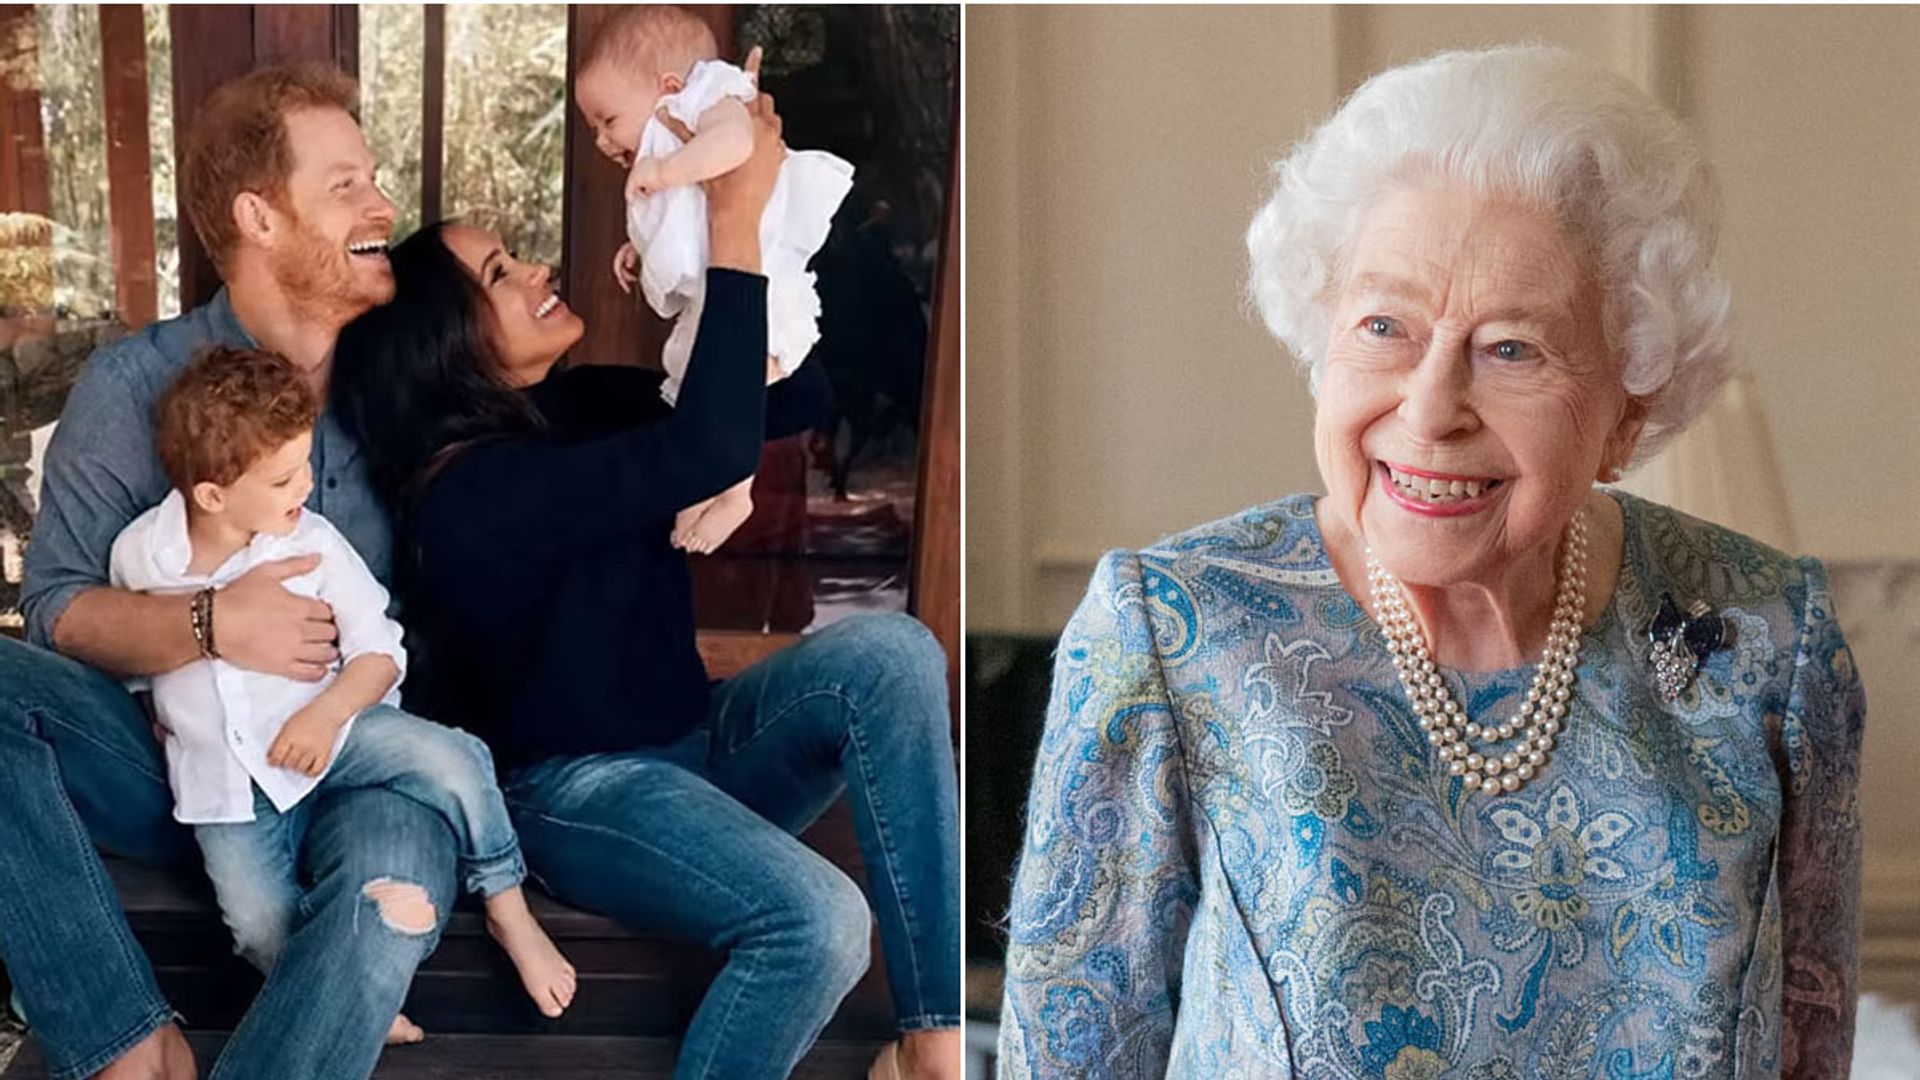 A split image of The Queen and the Sussex family